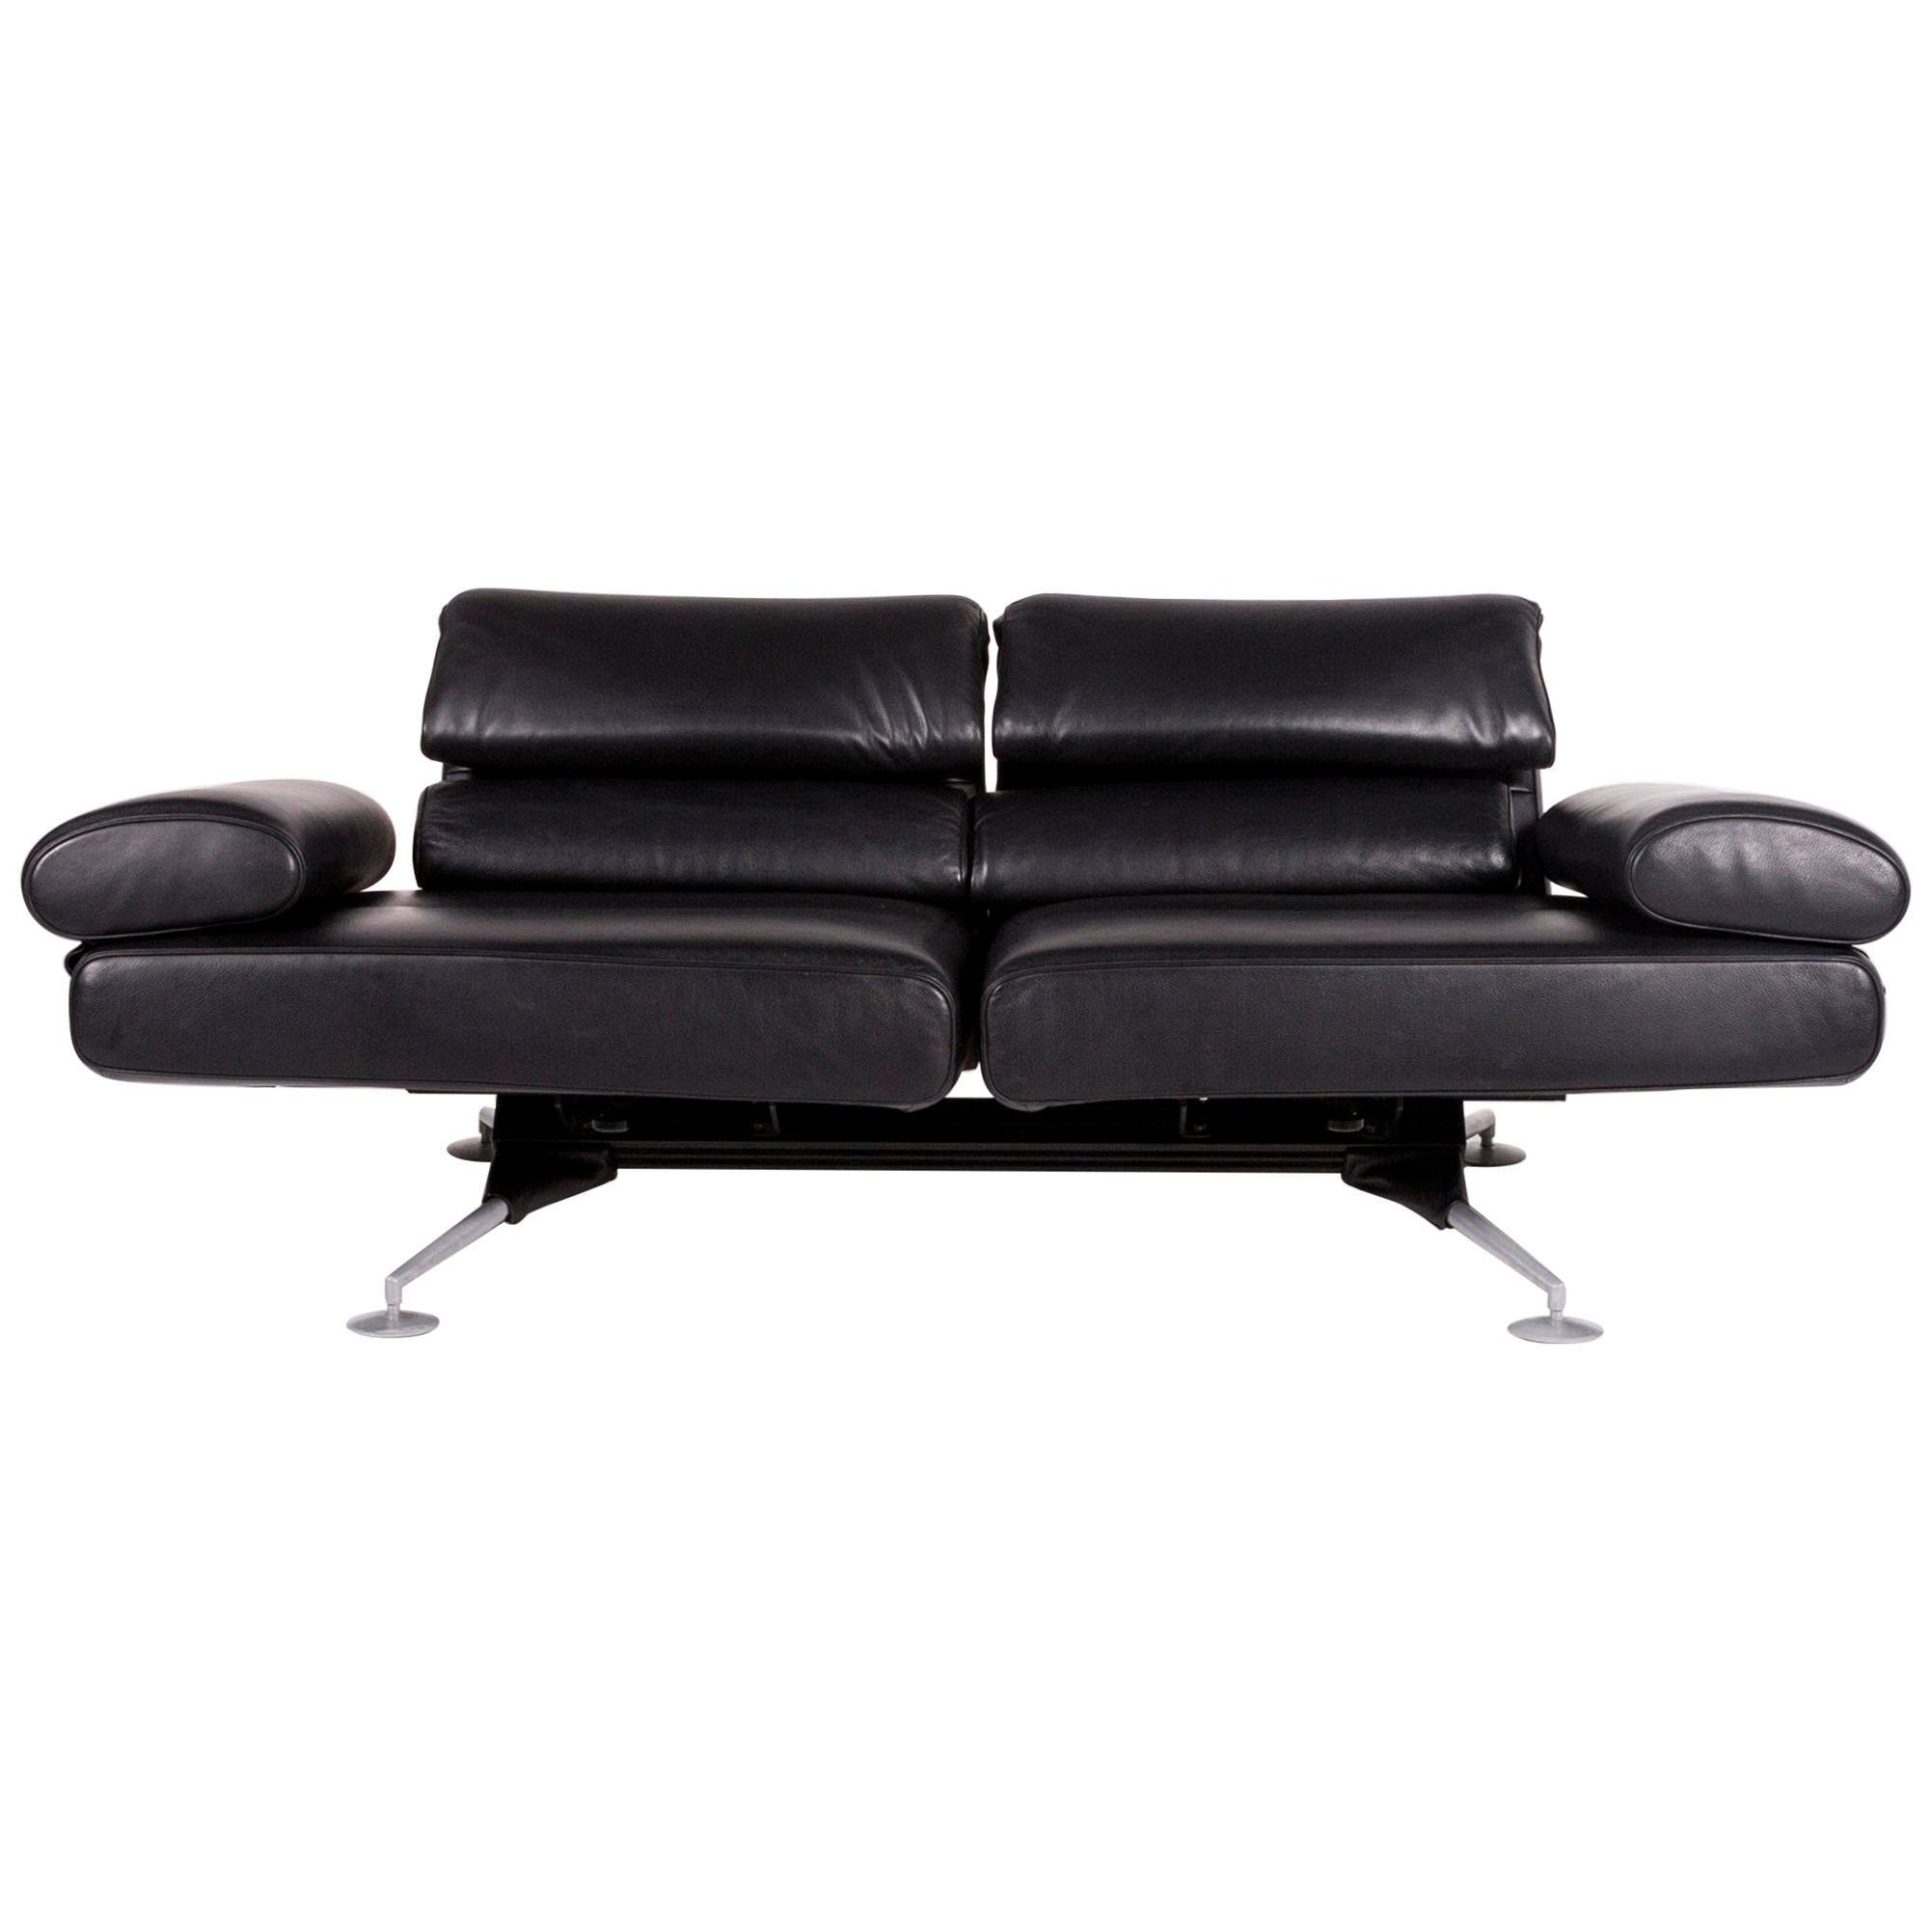 De Sede Ds 470 Leather Sofa Black Two-Seat Function Relax Function Couch